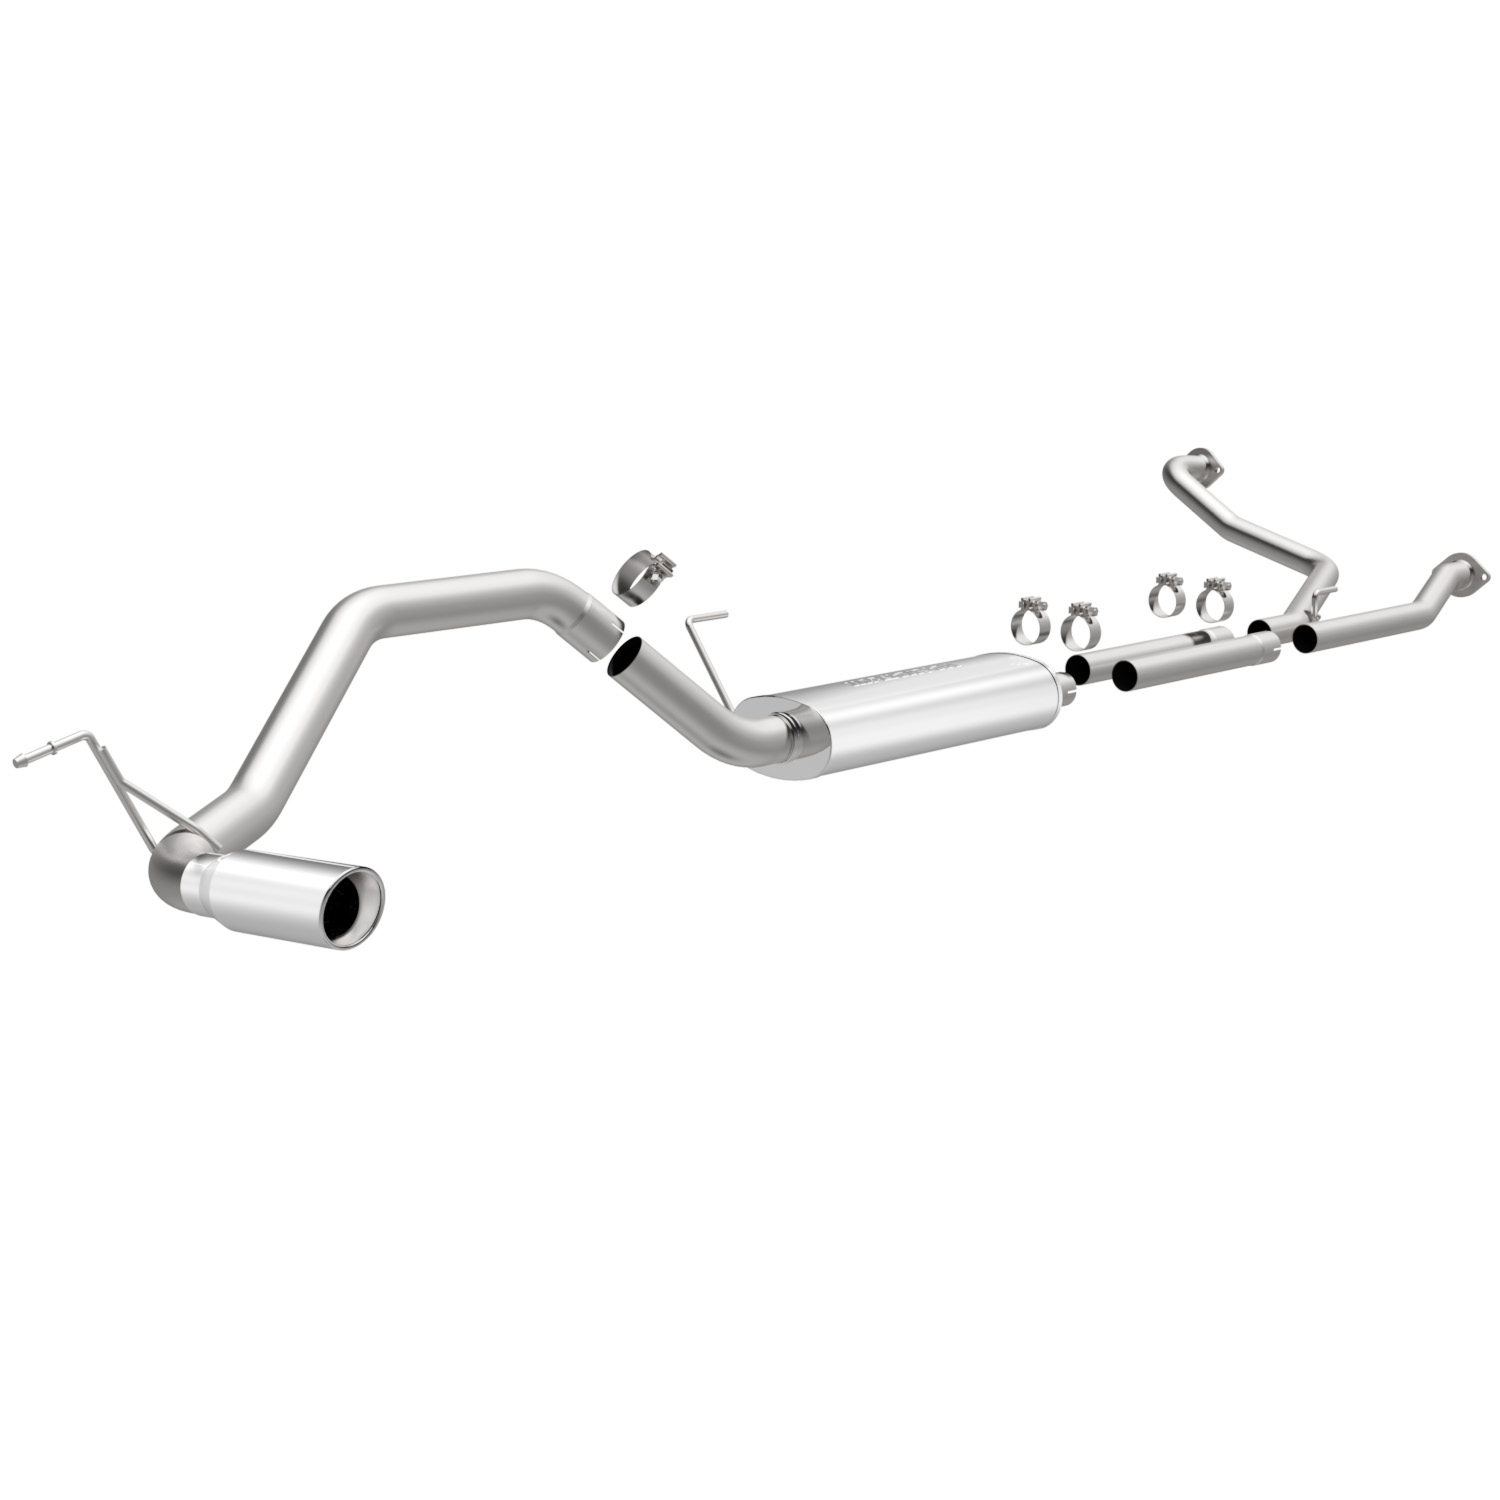 MF Series Cat-Back Exhaust System 2007-2015 for Nissan Titan 5.6L (Ext/Crew Cab, Short Bed)